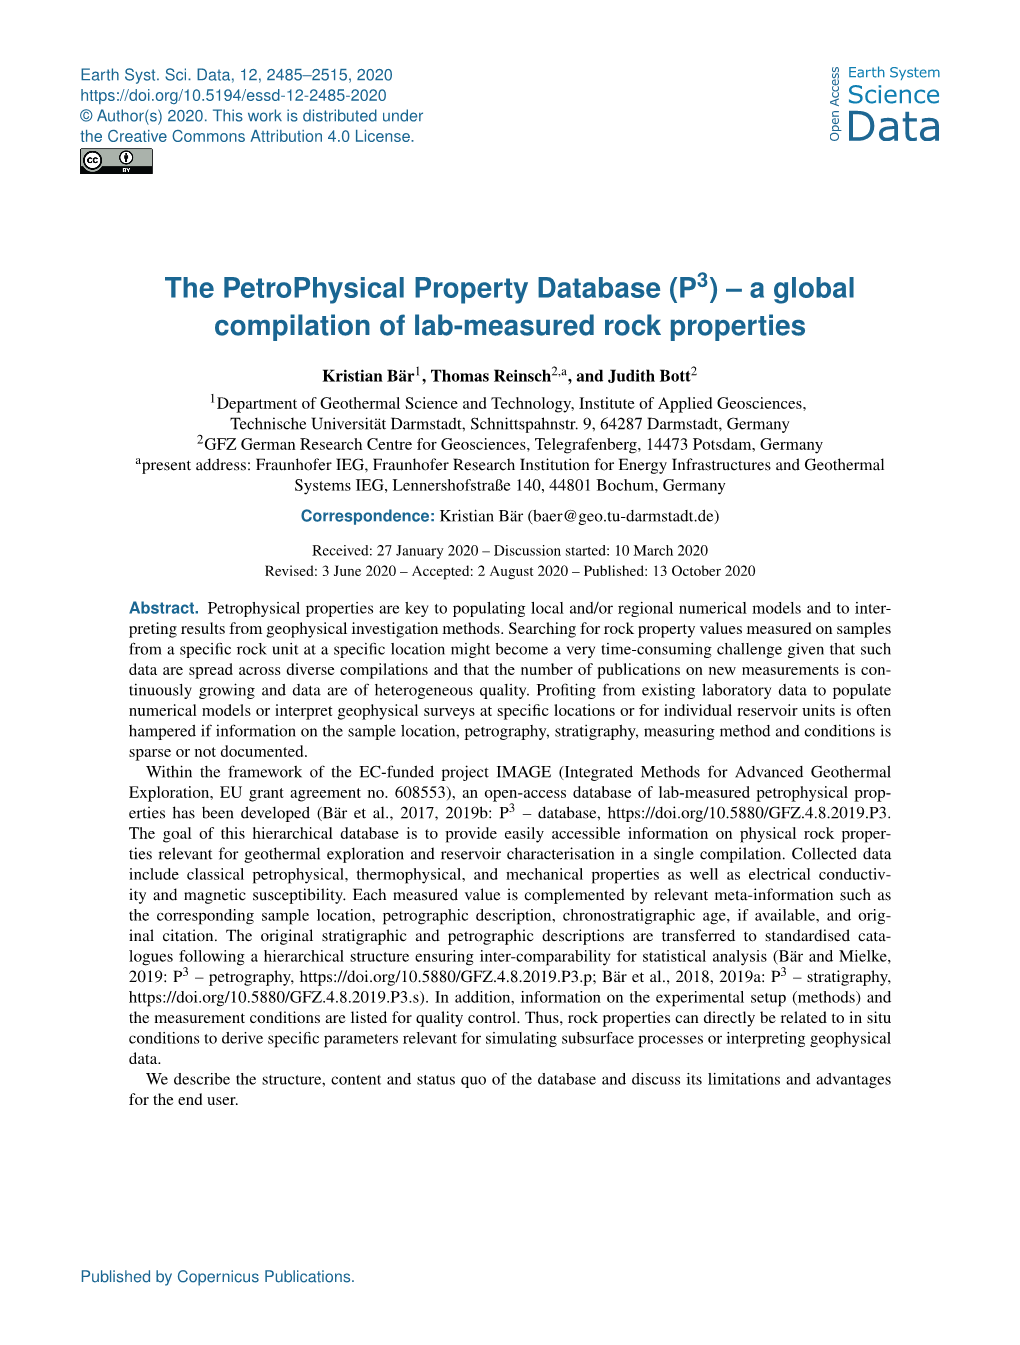 (P ) – a Global Compilation of Lab-Measured Rock Properties